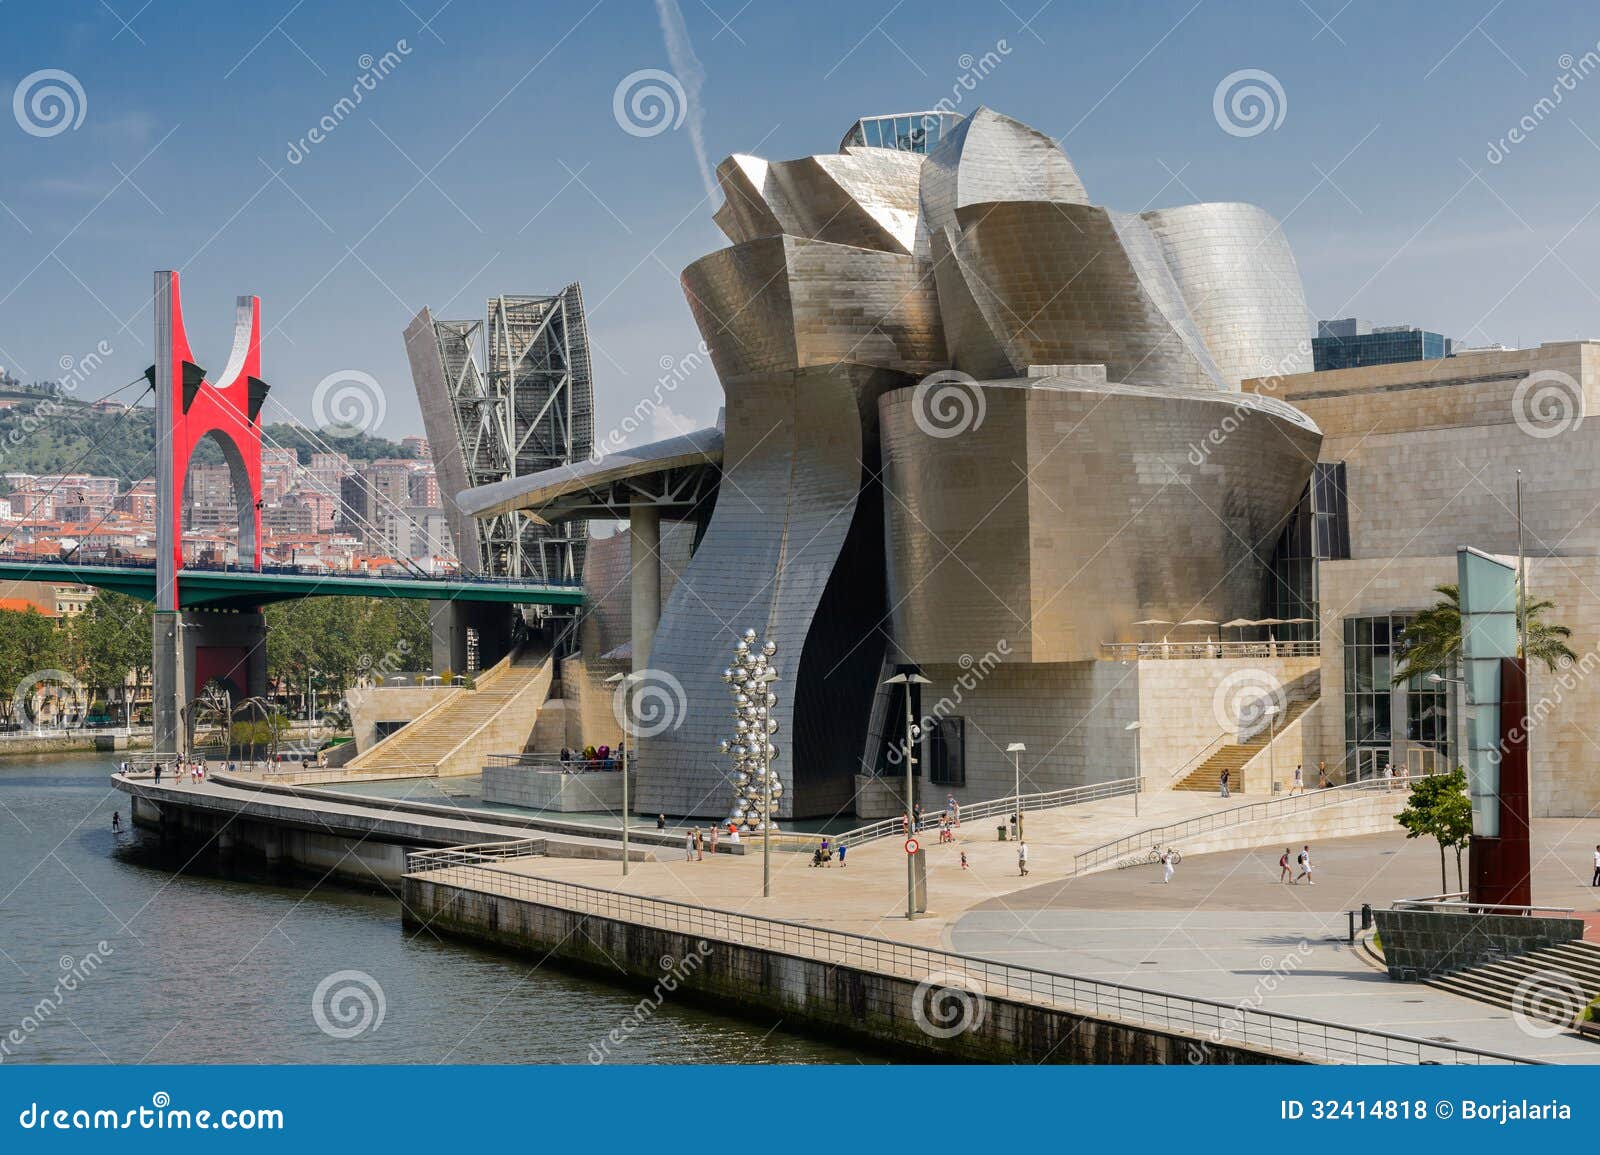 Guggenheim Museum in Bilbao, Spain. BILBAO, SPAIN - July 19: Exterior of The Guggenheim Museum on July 19, 2013 in Bilbao, Spain. The Guggenheim is a museum of modern and contemporary art designed by Canadian-American architect Frank Gehry